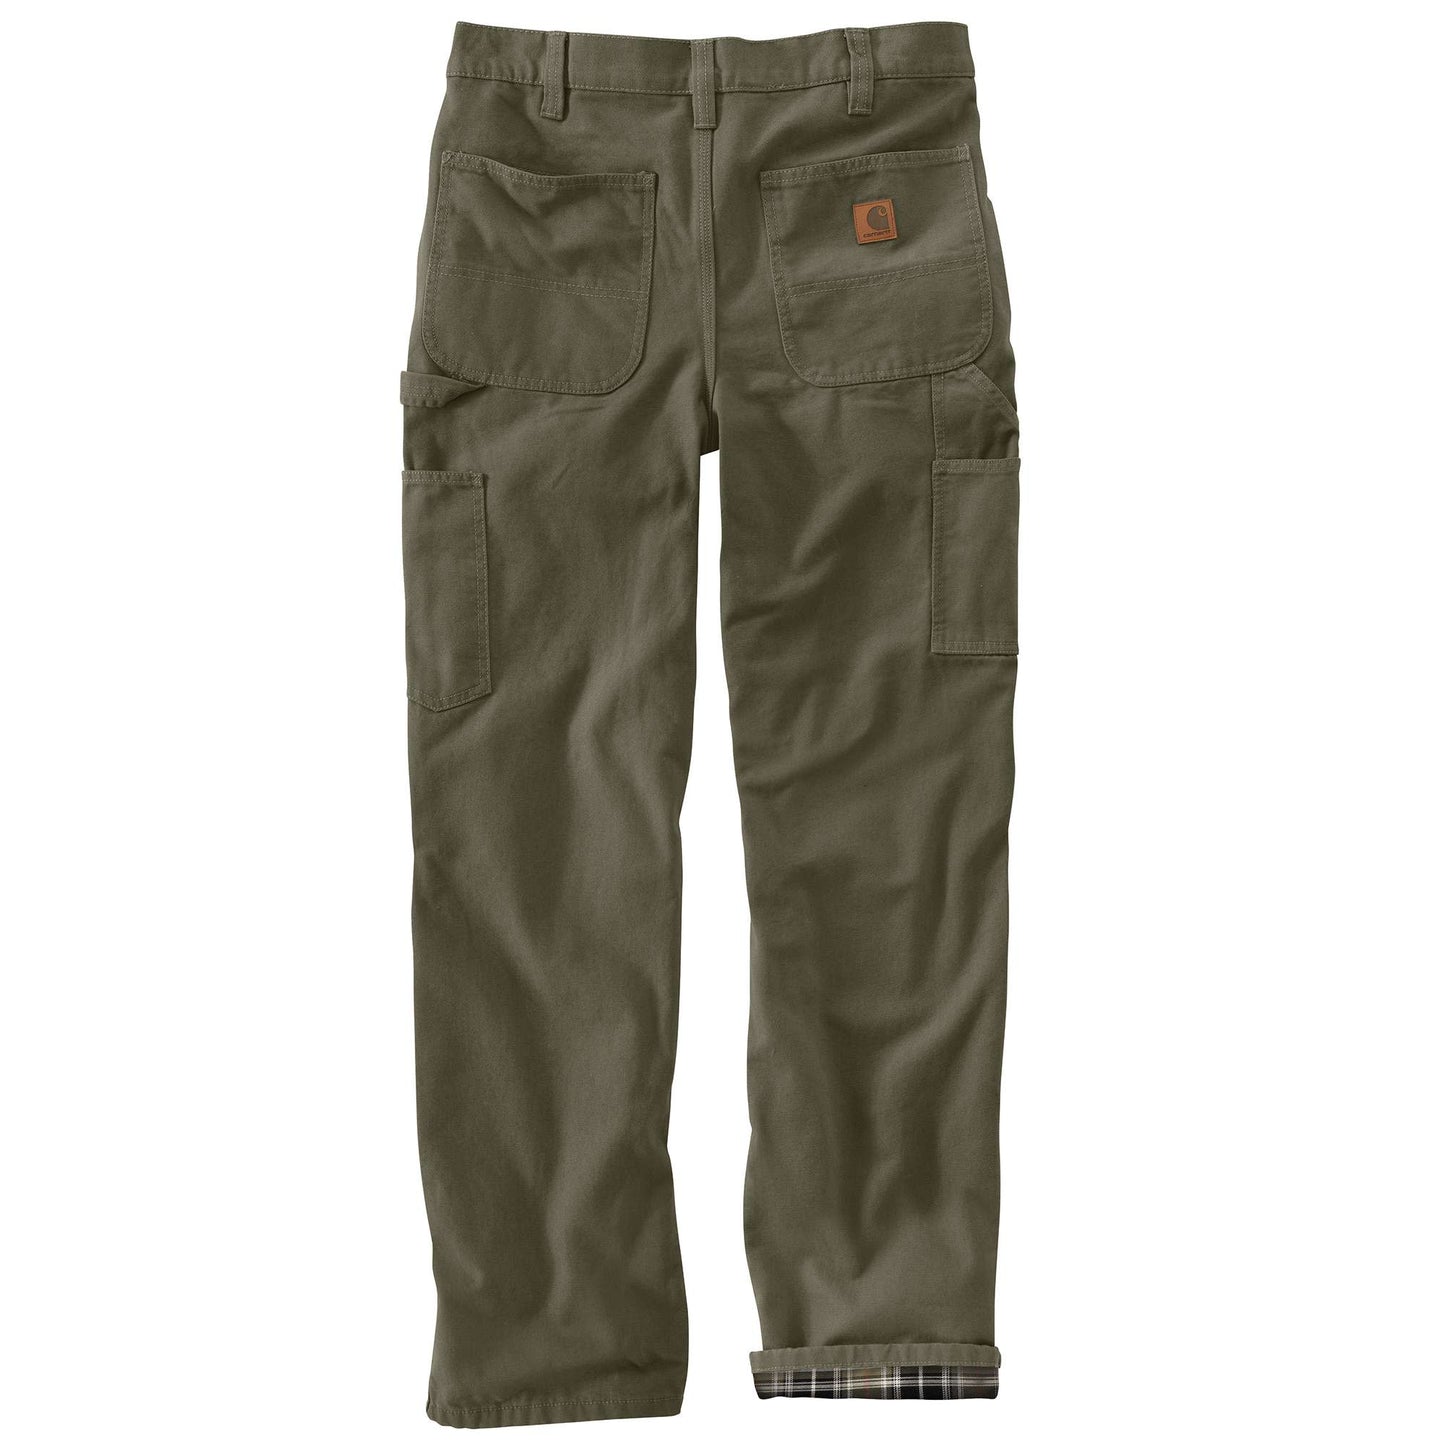 Loose Fit Washed Duck Flannel-Lined Utility Work Pant | Carhartt Reworked